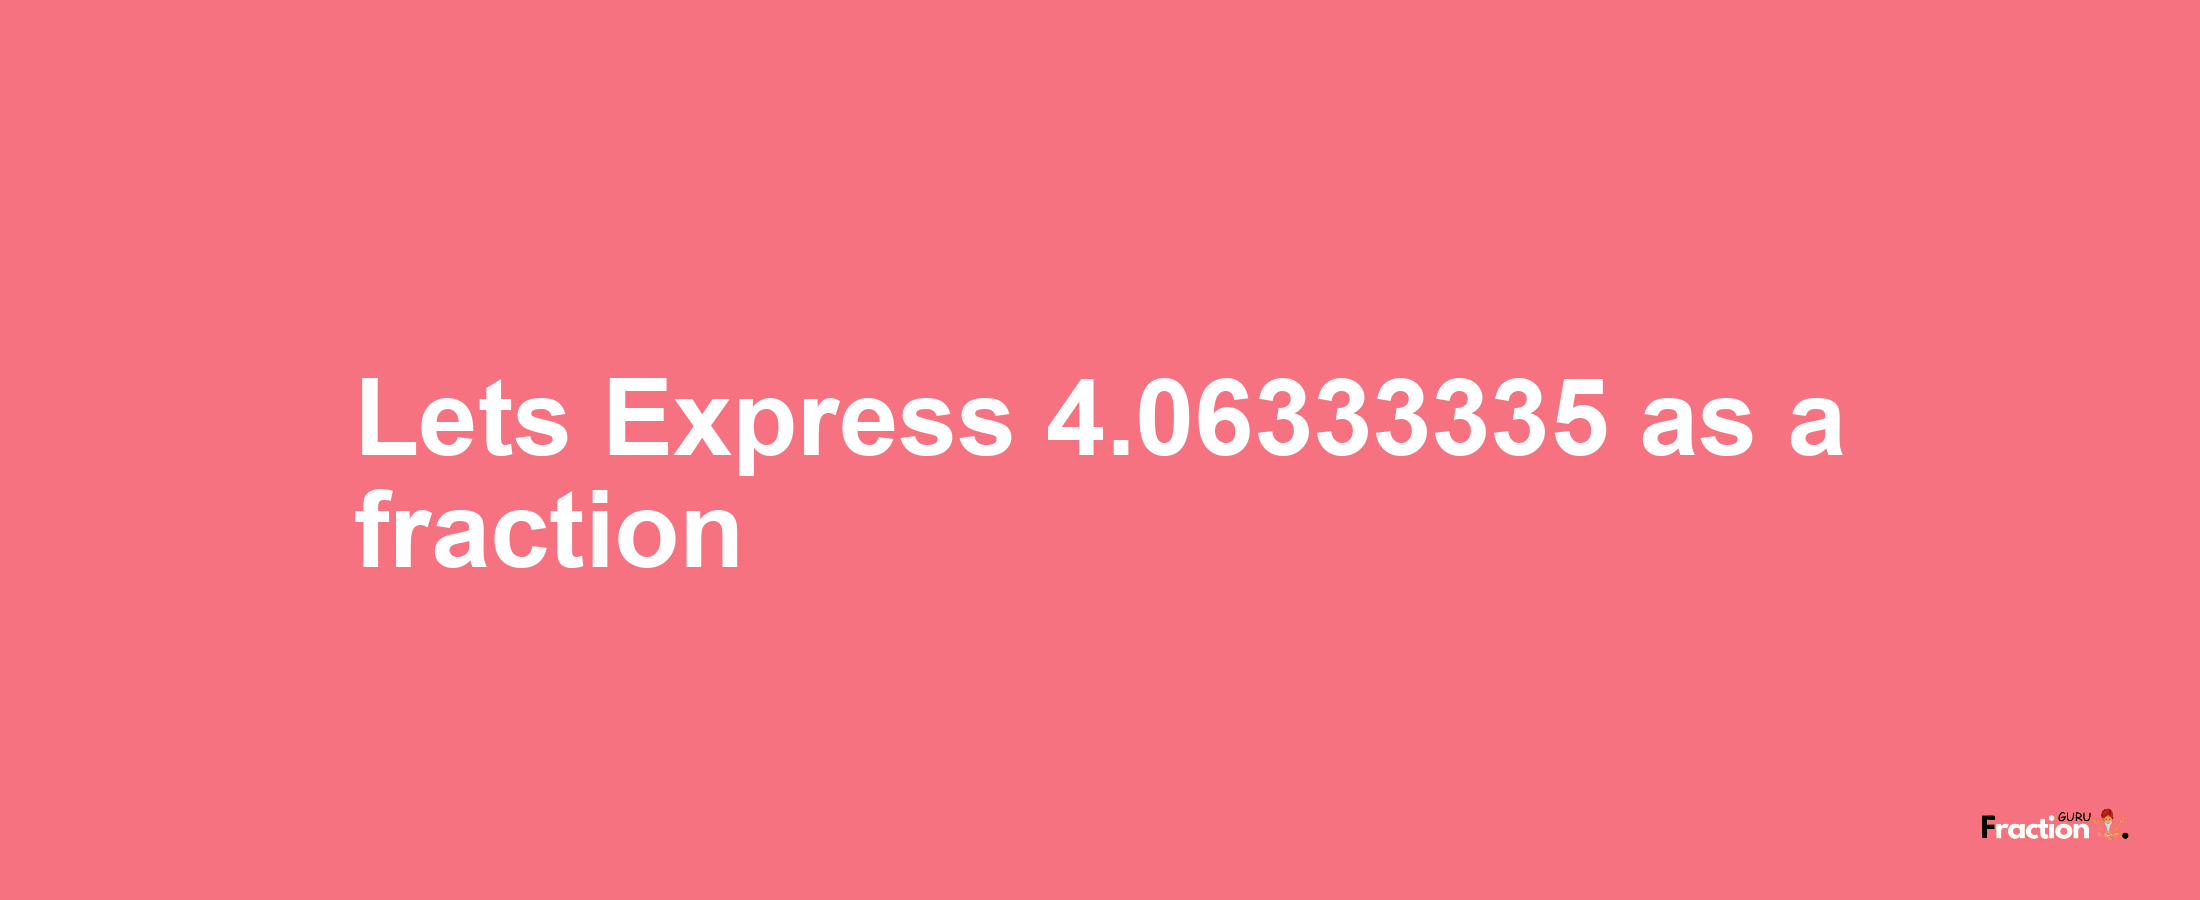 Lets Express 4.06333335 as afraction